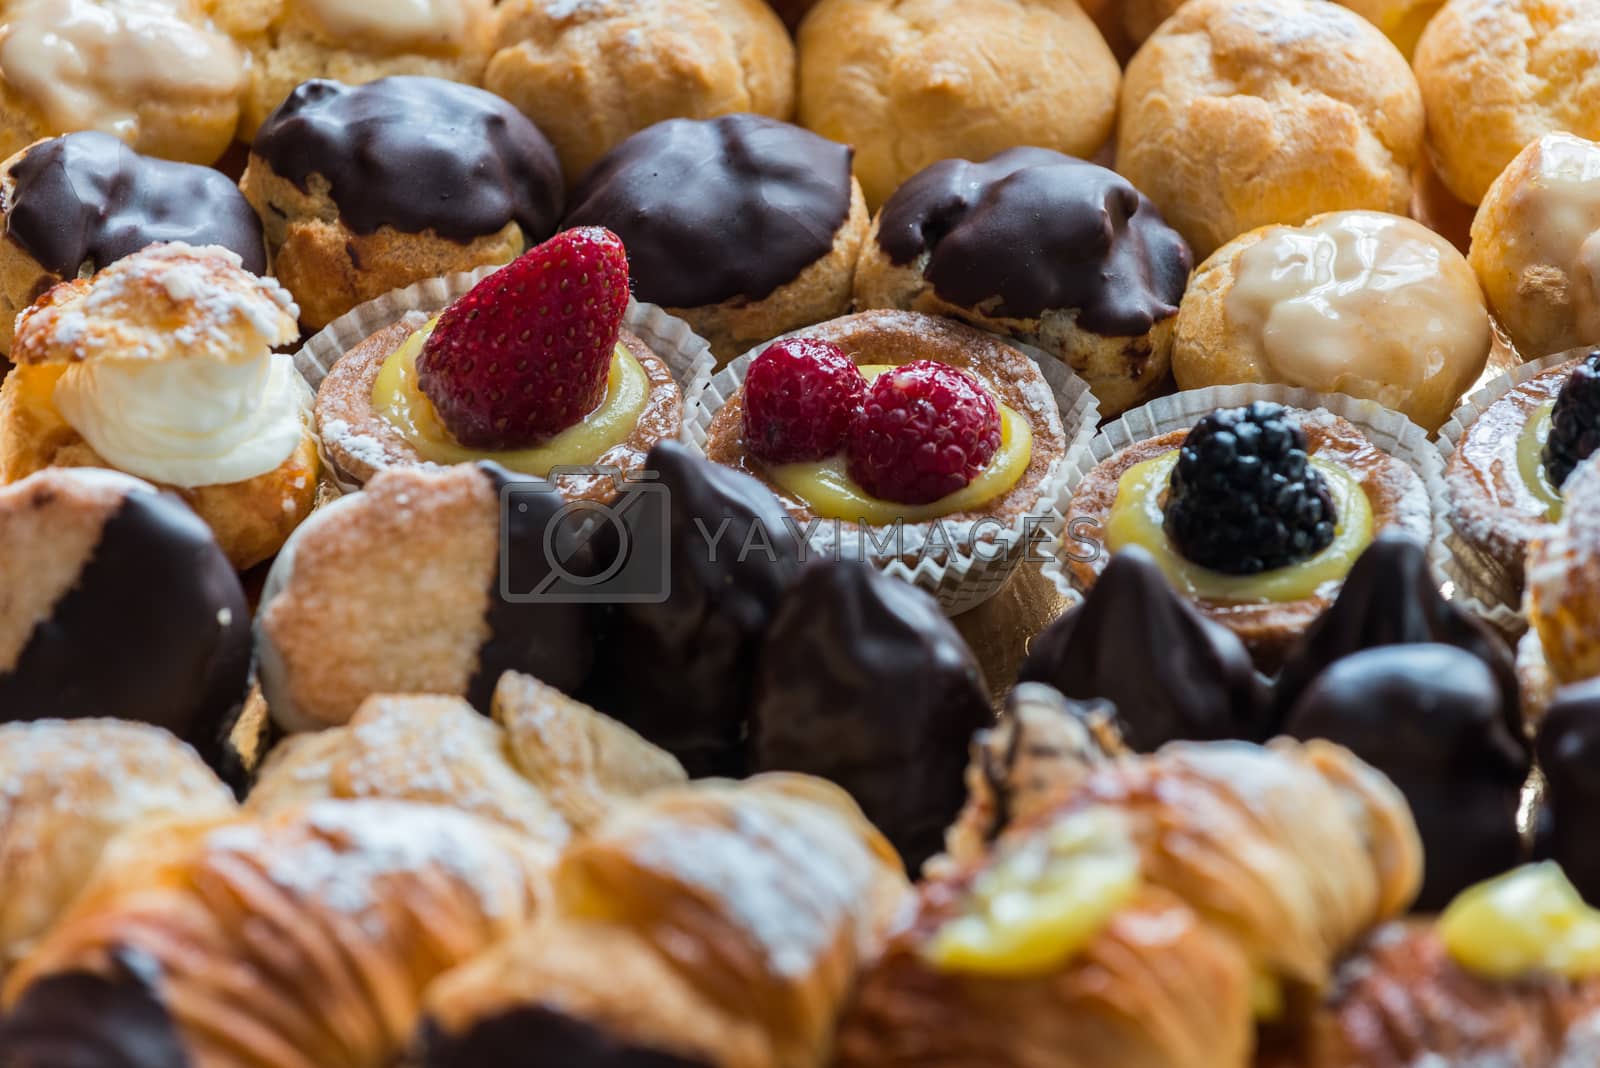 Royalty free image of Typical pastries  by Robertobinetti70